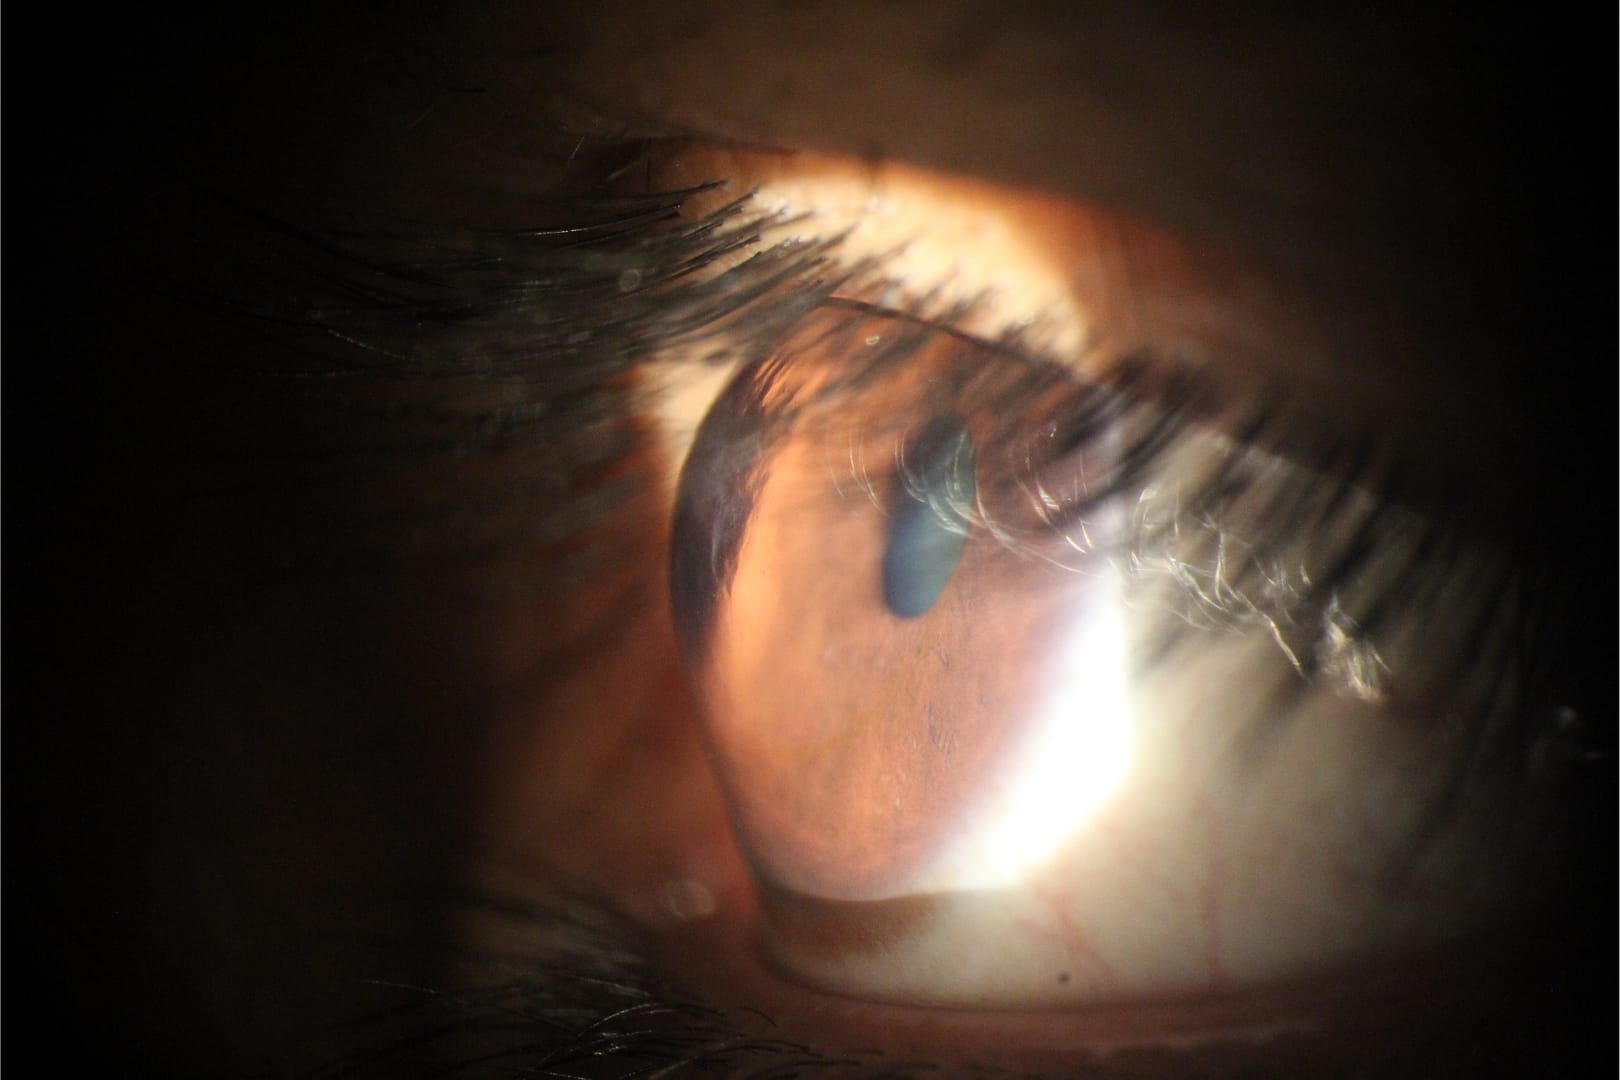 eye with keratoconus can Have 20/20 Vision